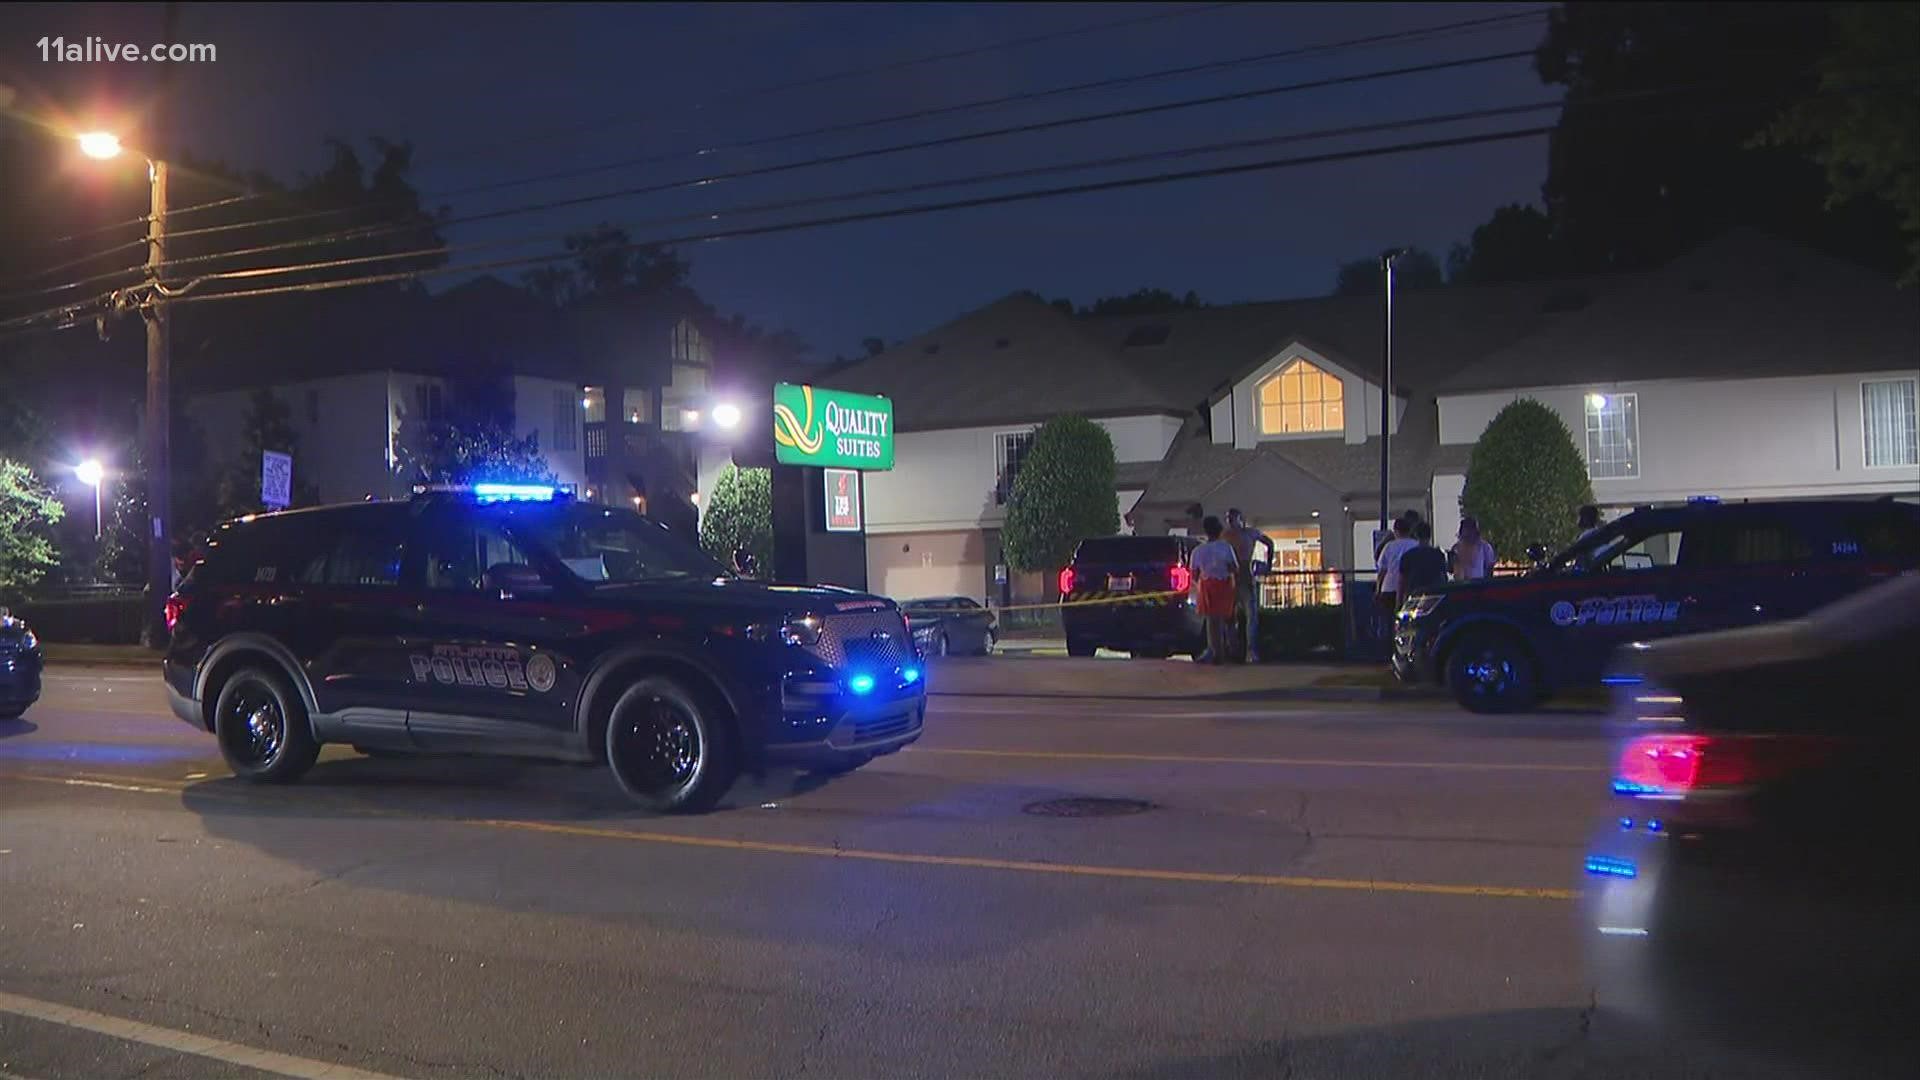 Atlanta Police are investigating the shooting at a Quality Suites.